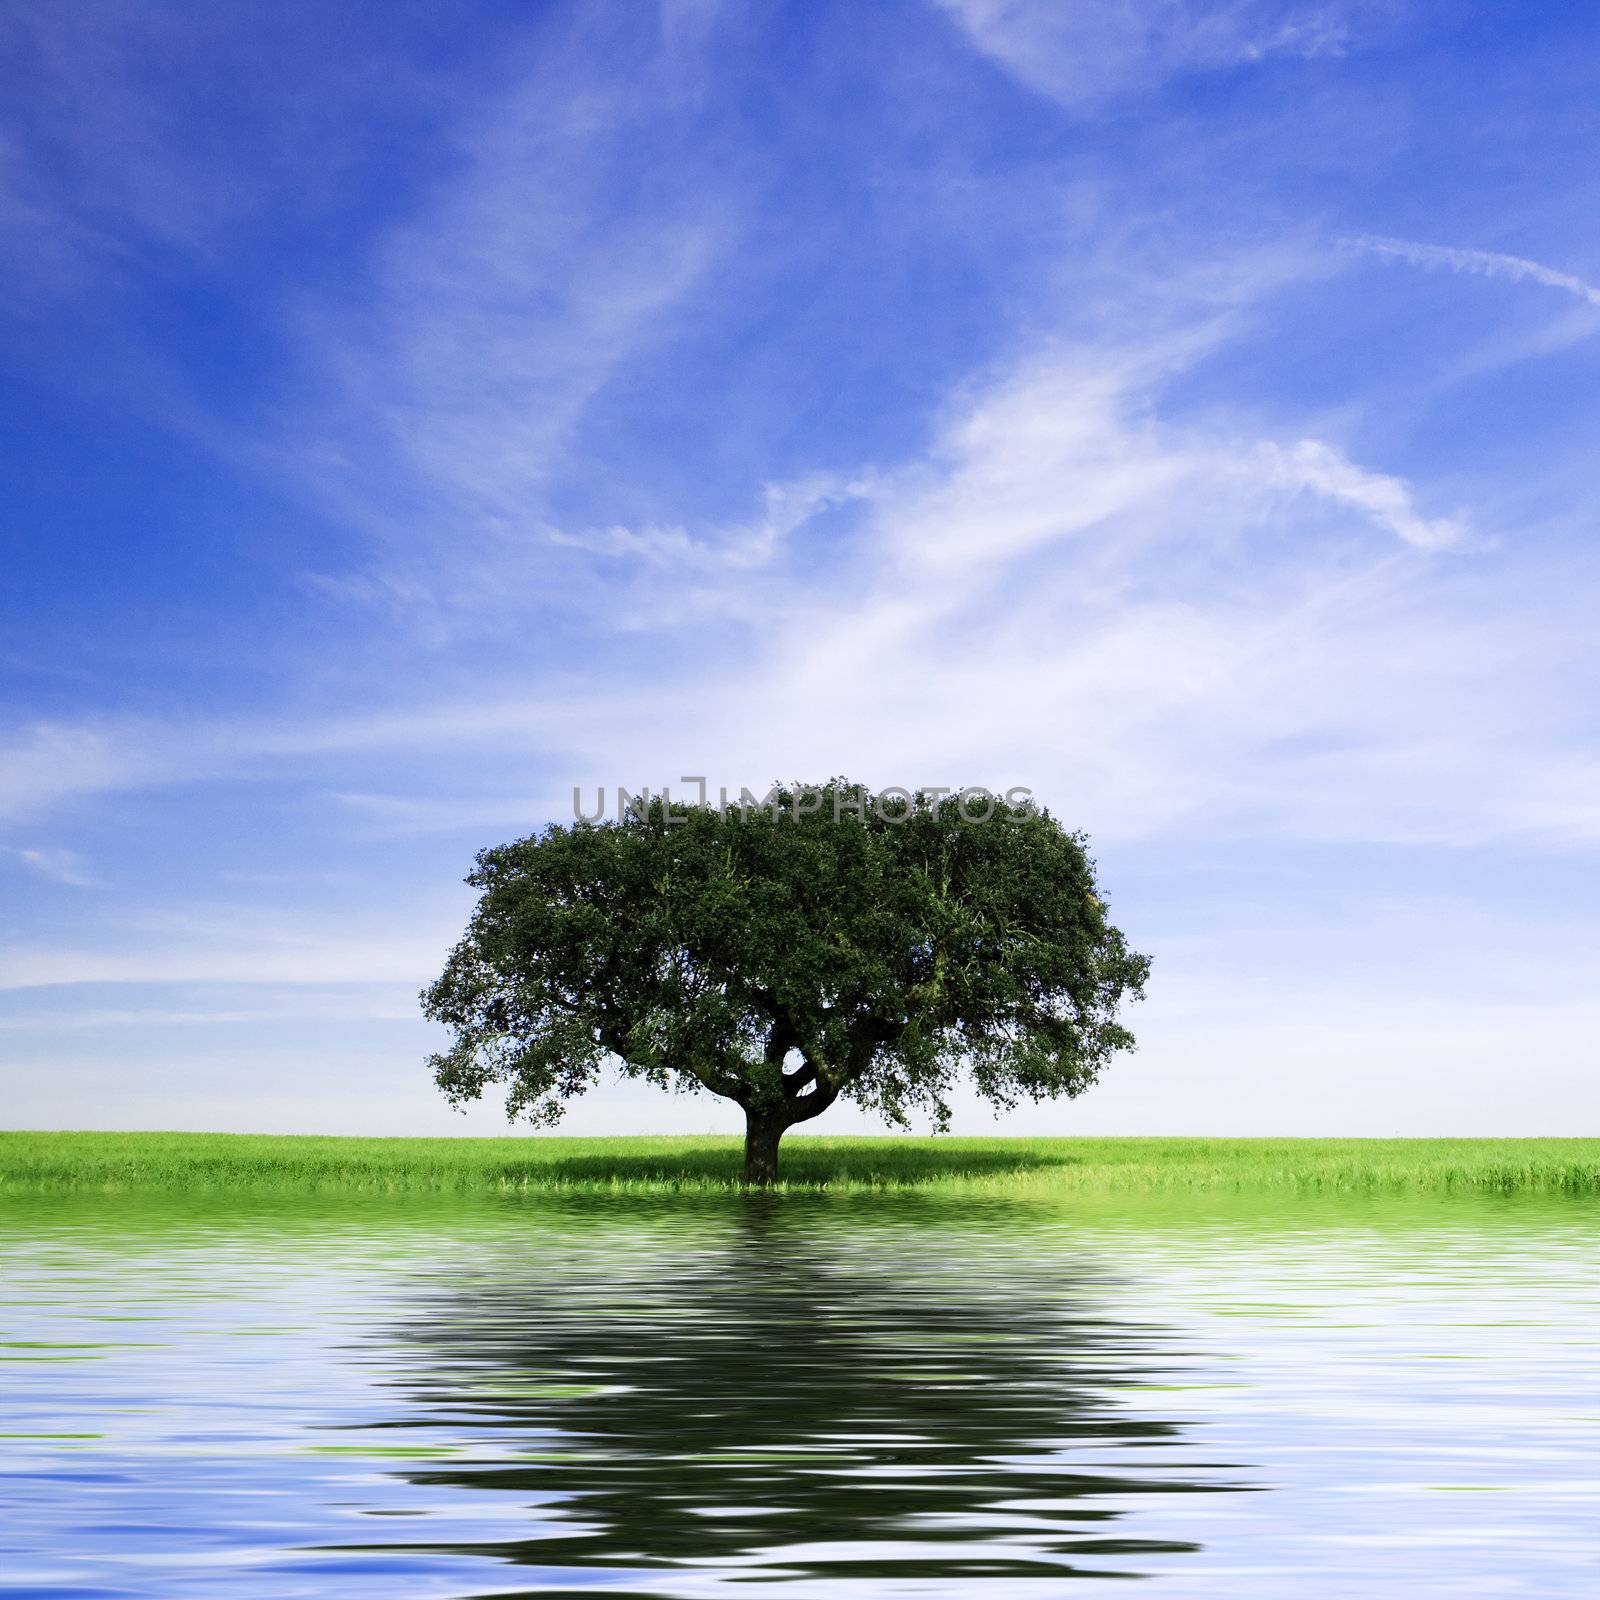 lonely tree in rural landscape with water reflex by mlopes